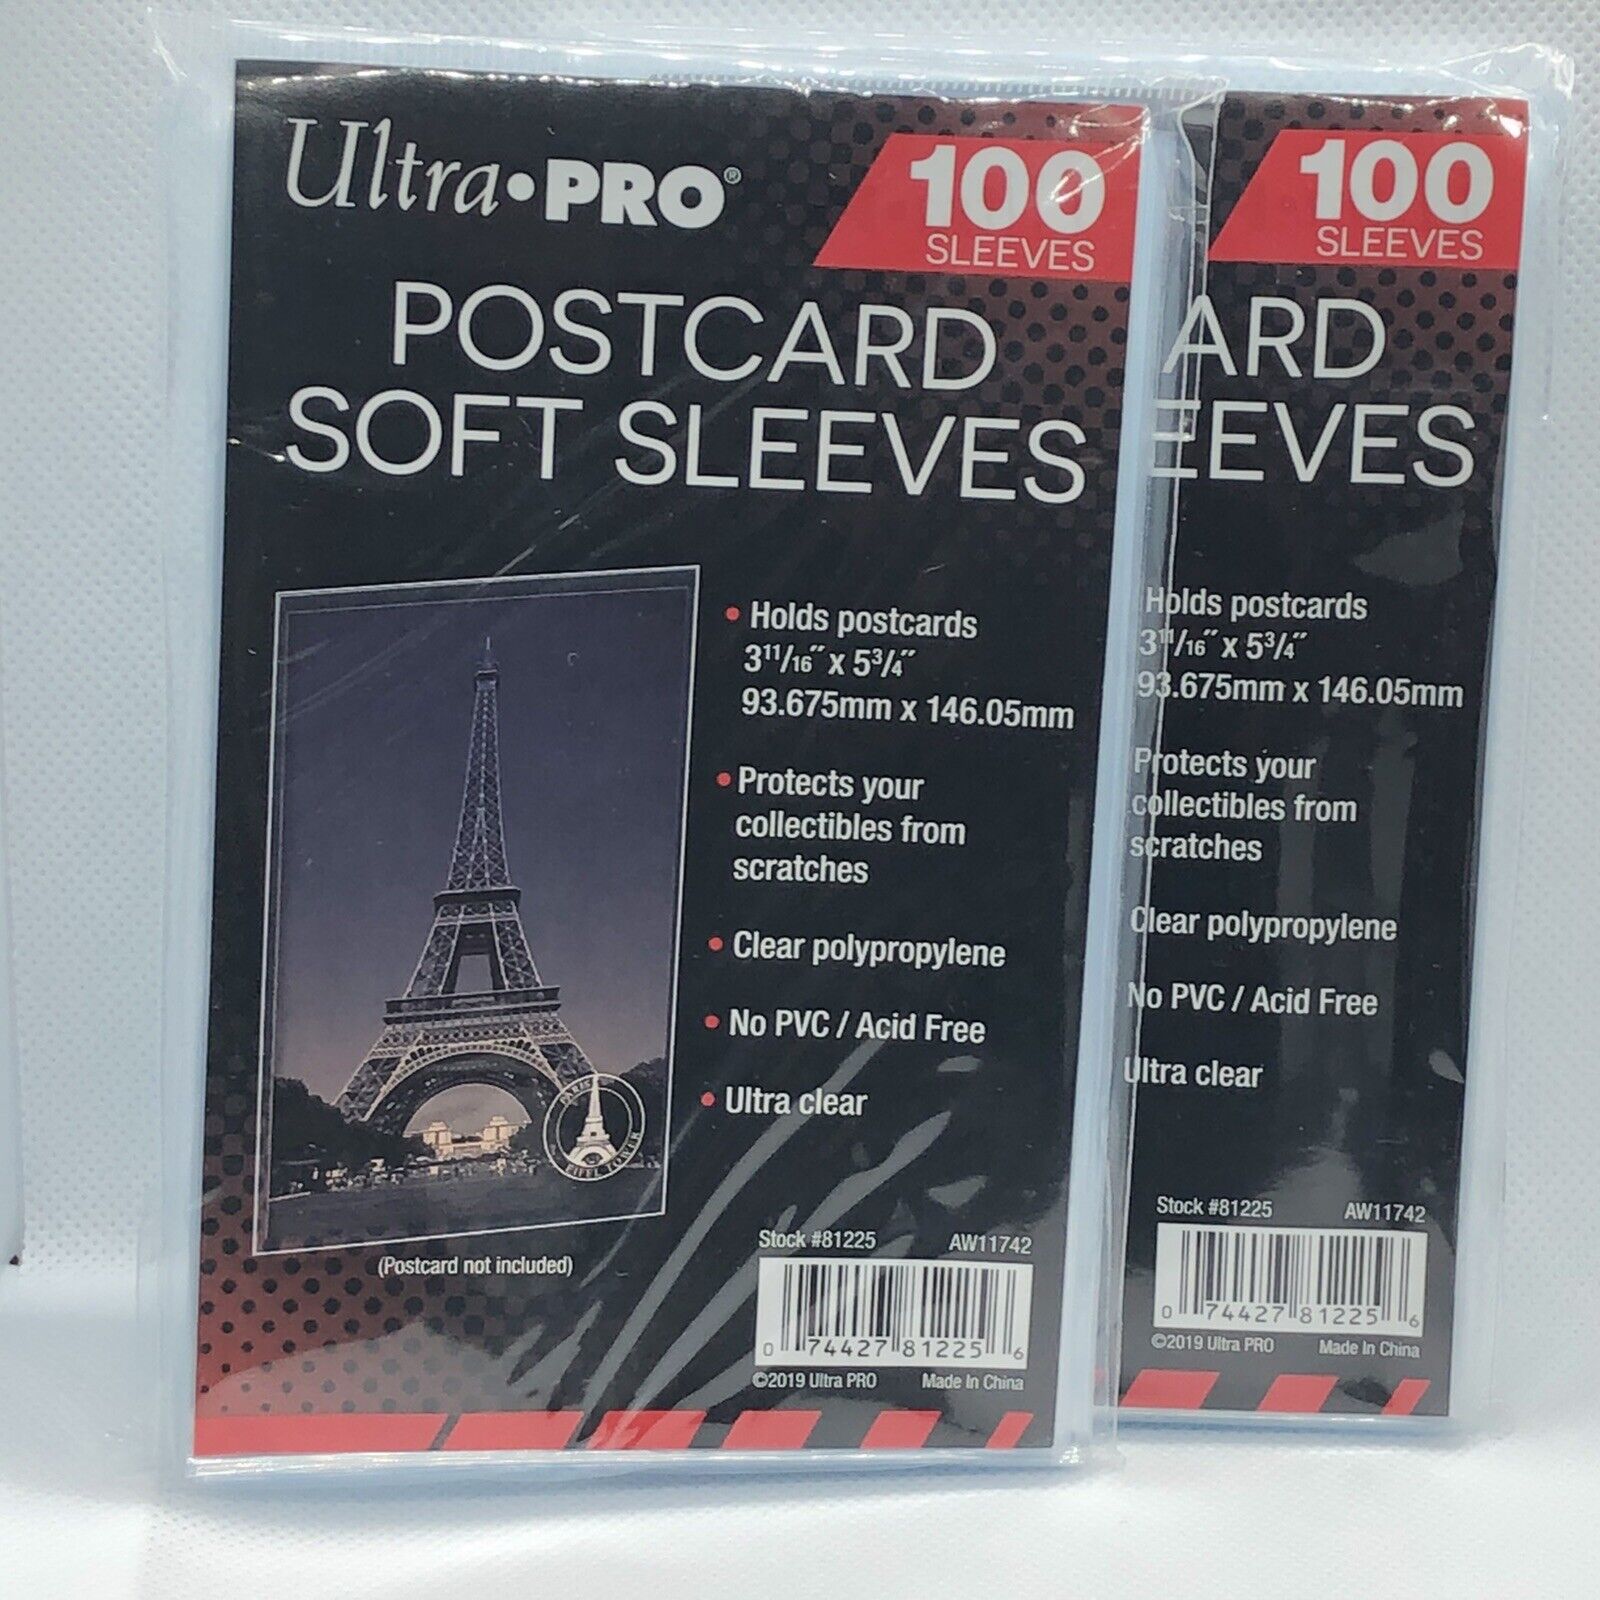 (2) Ultra Pro Postcard Soft Sleeves Ultra Clear 100ct Free Shipping! Ultra PRO